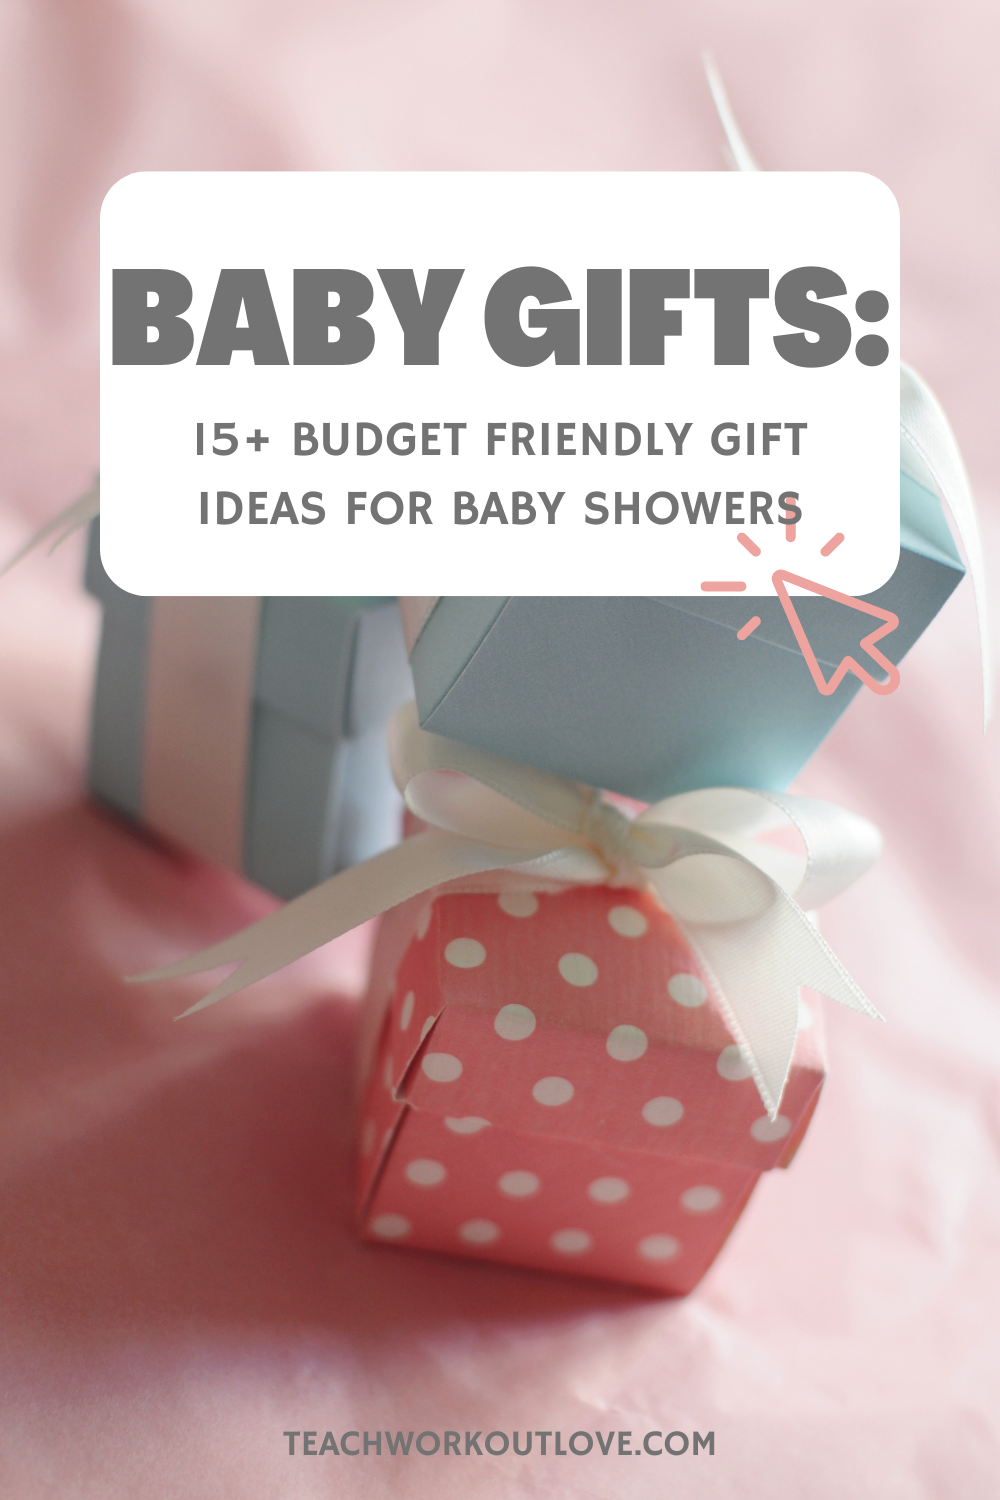 Here are some designer gifts for babies, which we review the manufacturer's suggested ages for use, as well as their safety features, construction, and overall quality.